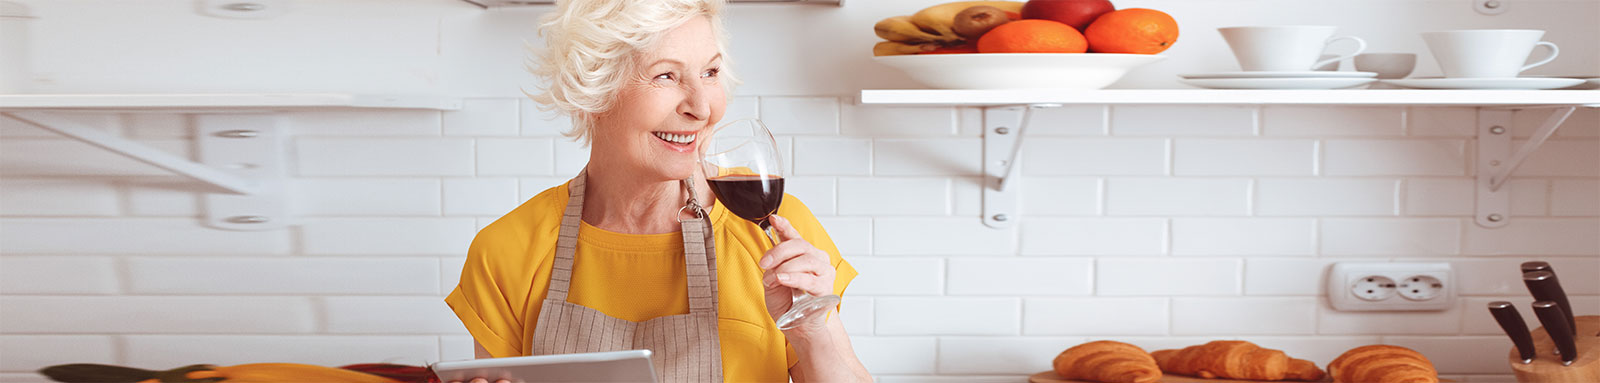 Elderly woman drinking red wine in the kitchen while holding tablet